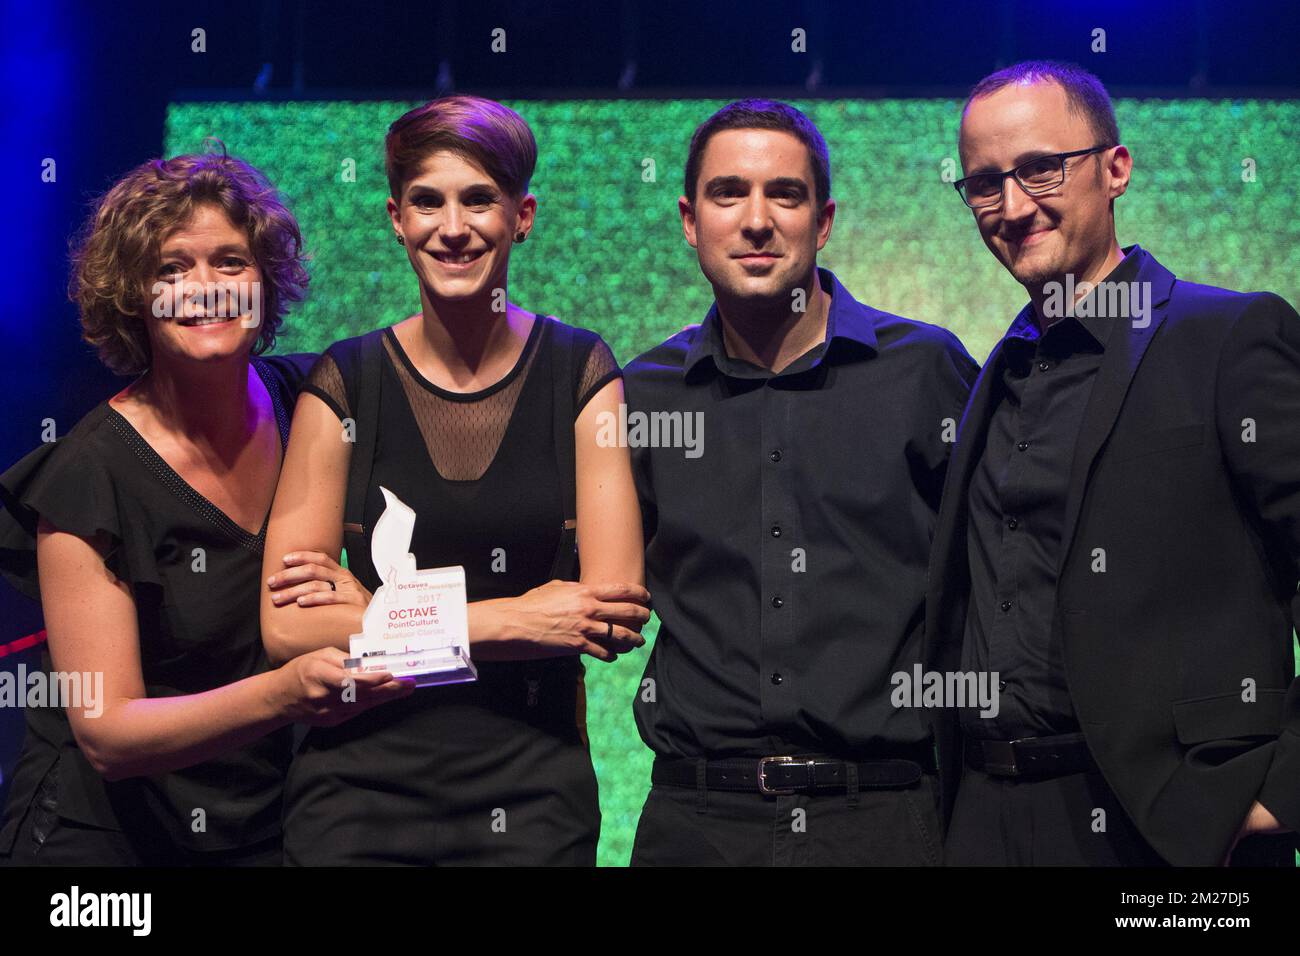 Quatuor Clarias poses with the 'Pointculture' prize at the 14th edition of the 'Les Octaves de la Musique' music awards ceremony, Monday 29 May 2017 in Brussels. BELGA PHOTO LAURIE DIEFFEMBACQ Stock Photo